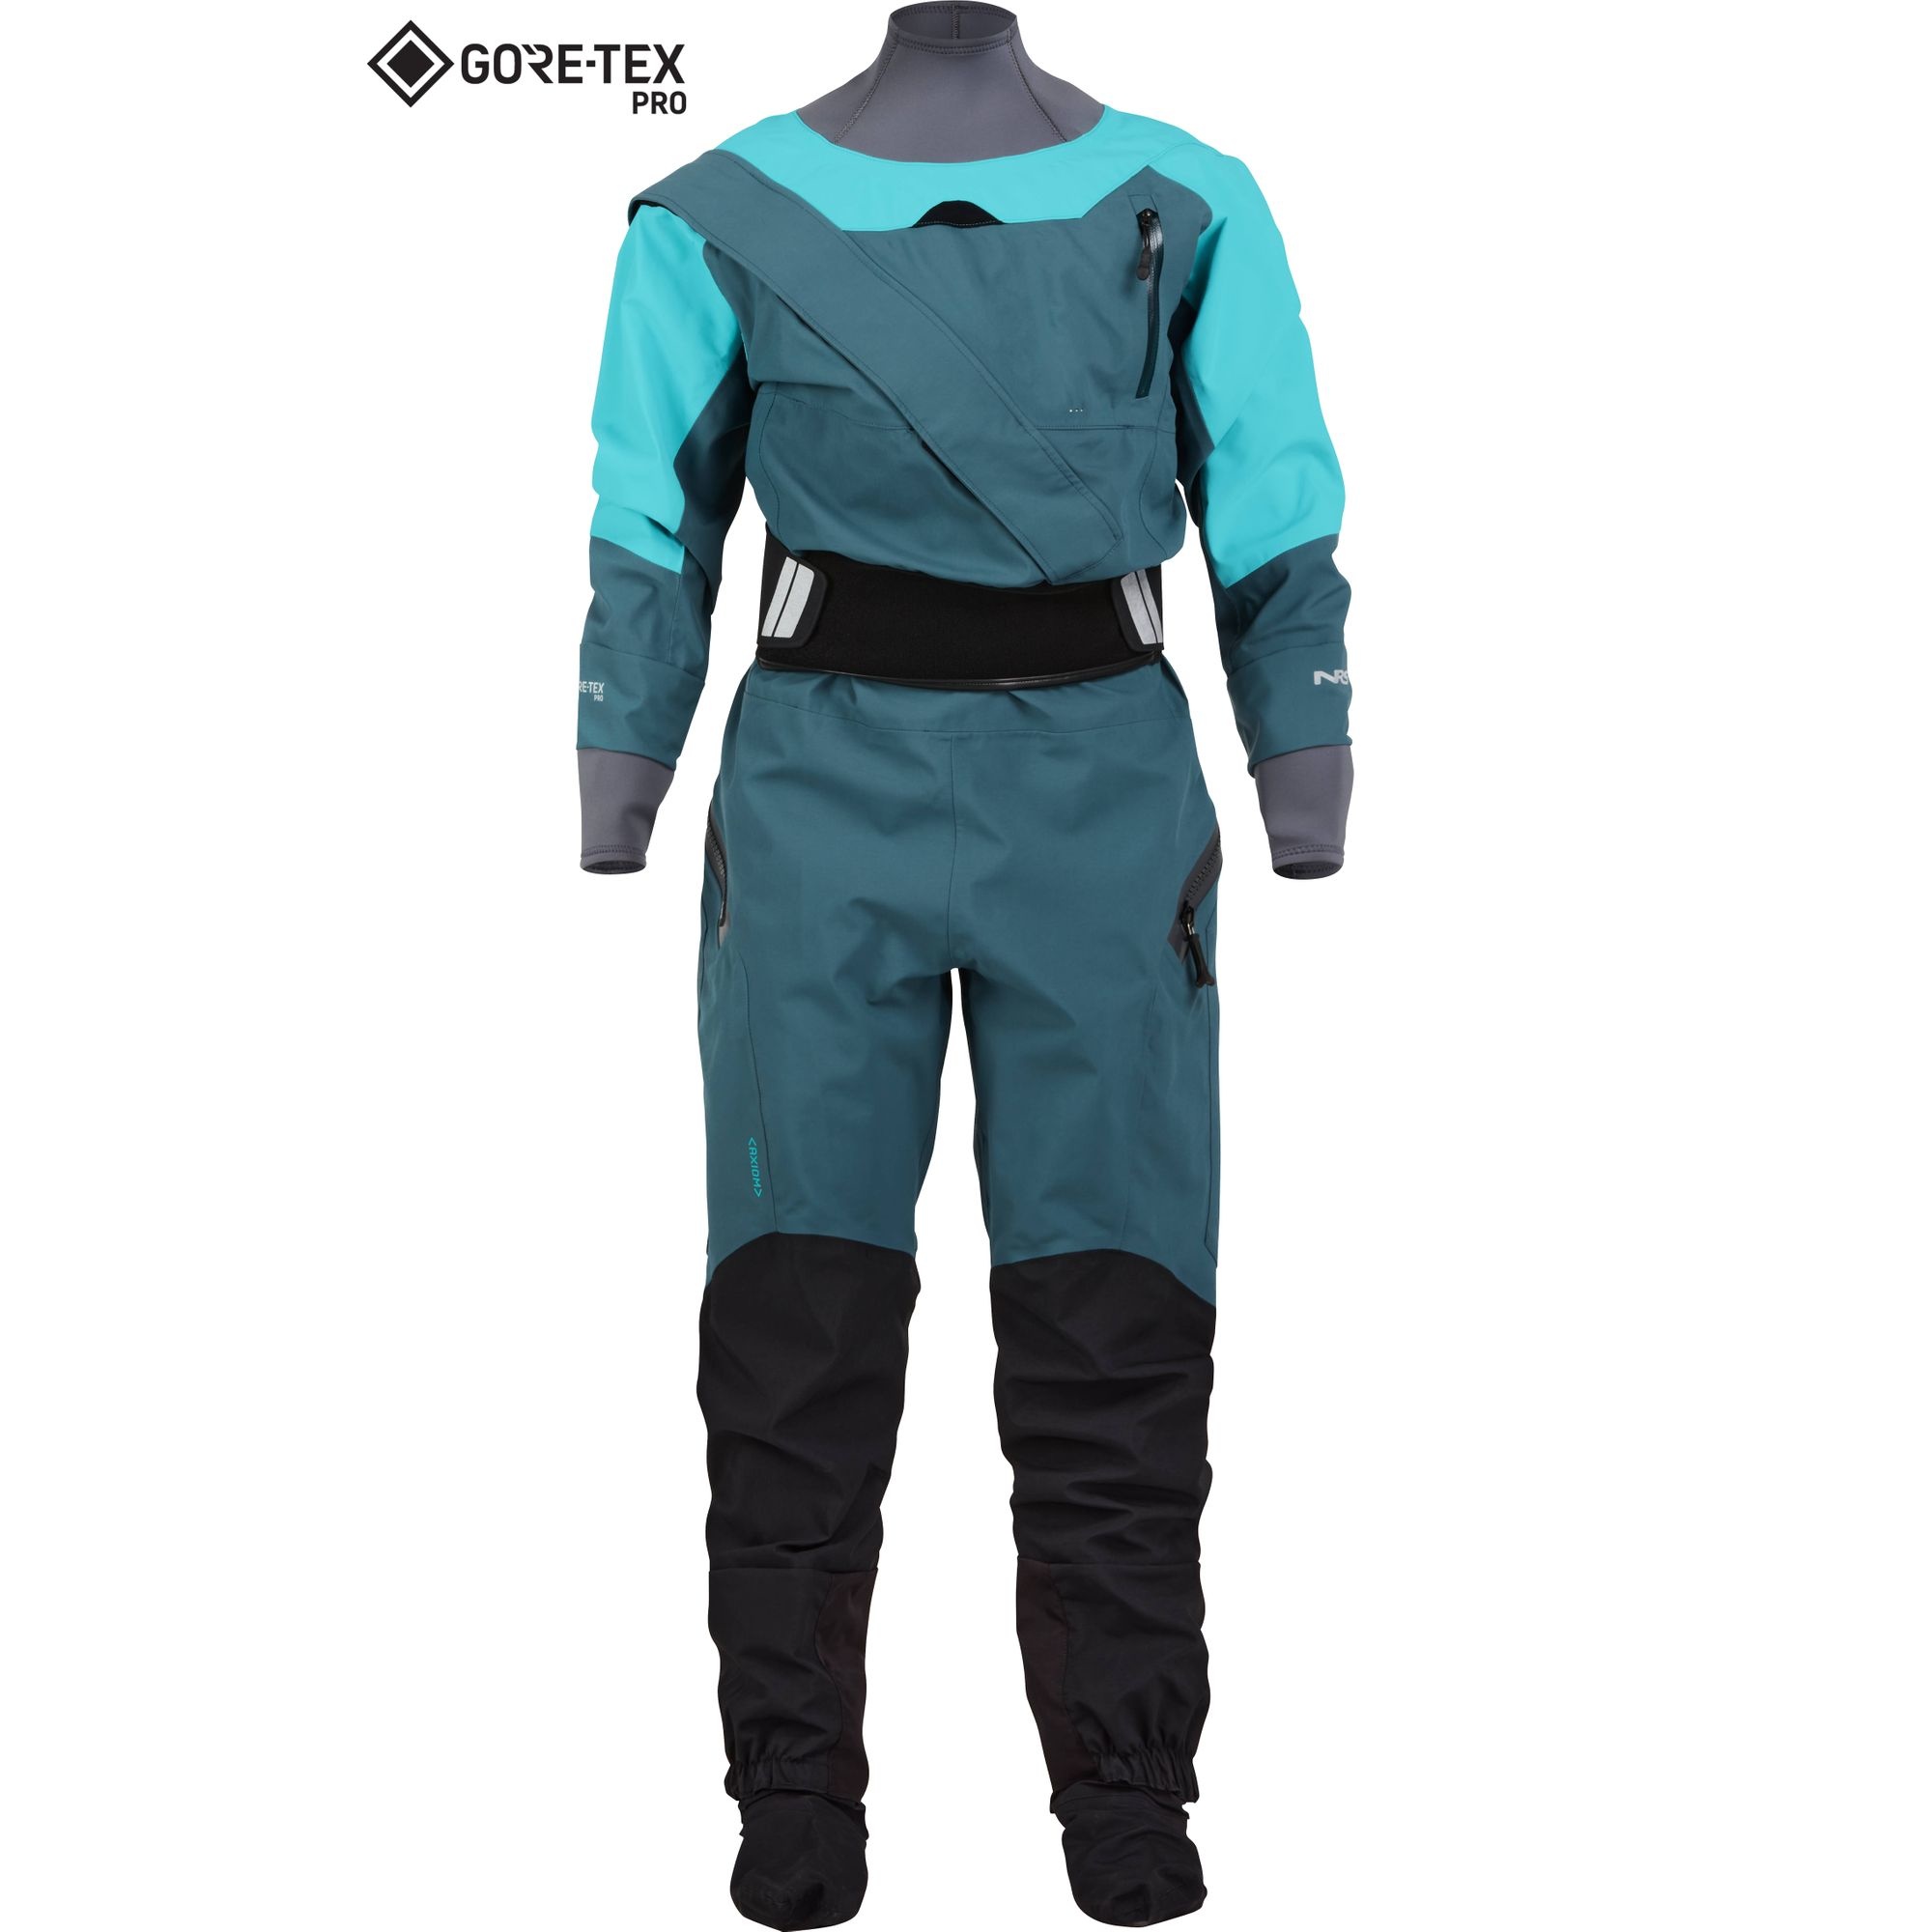 NRS NRS Women's Axiom GORE-TEX Pro Dry Suit